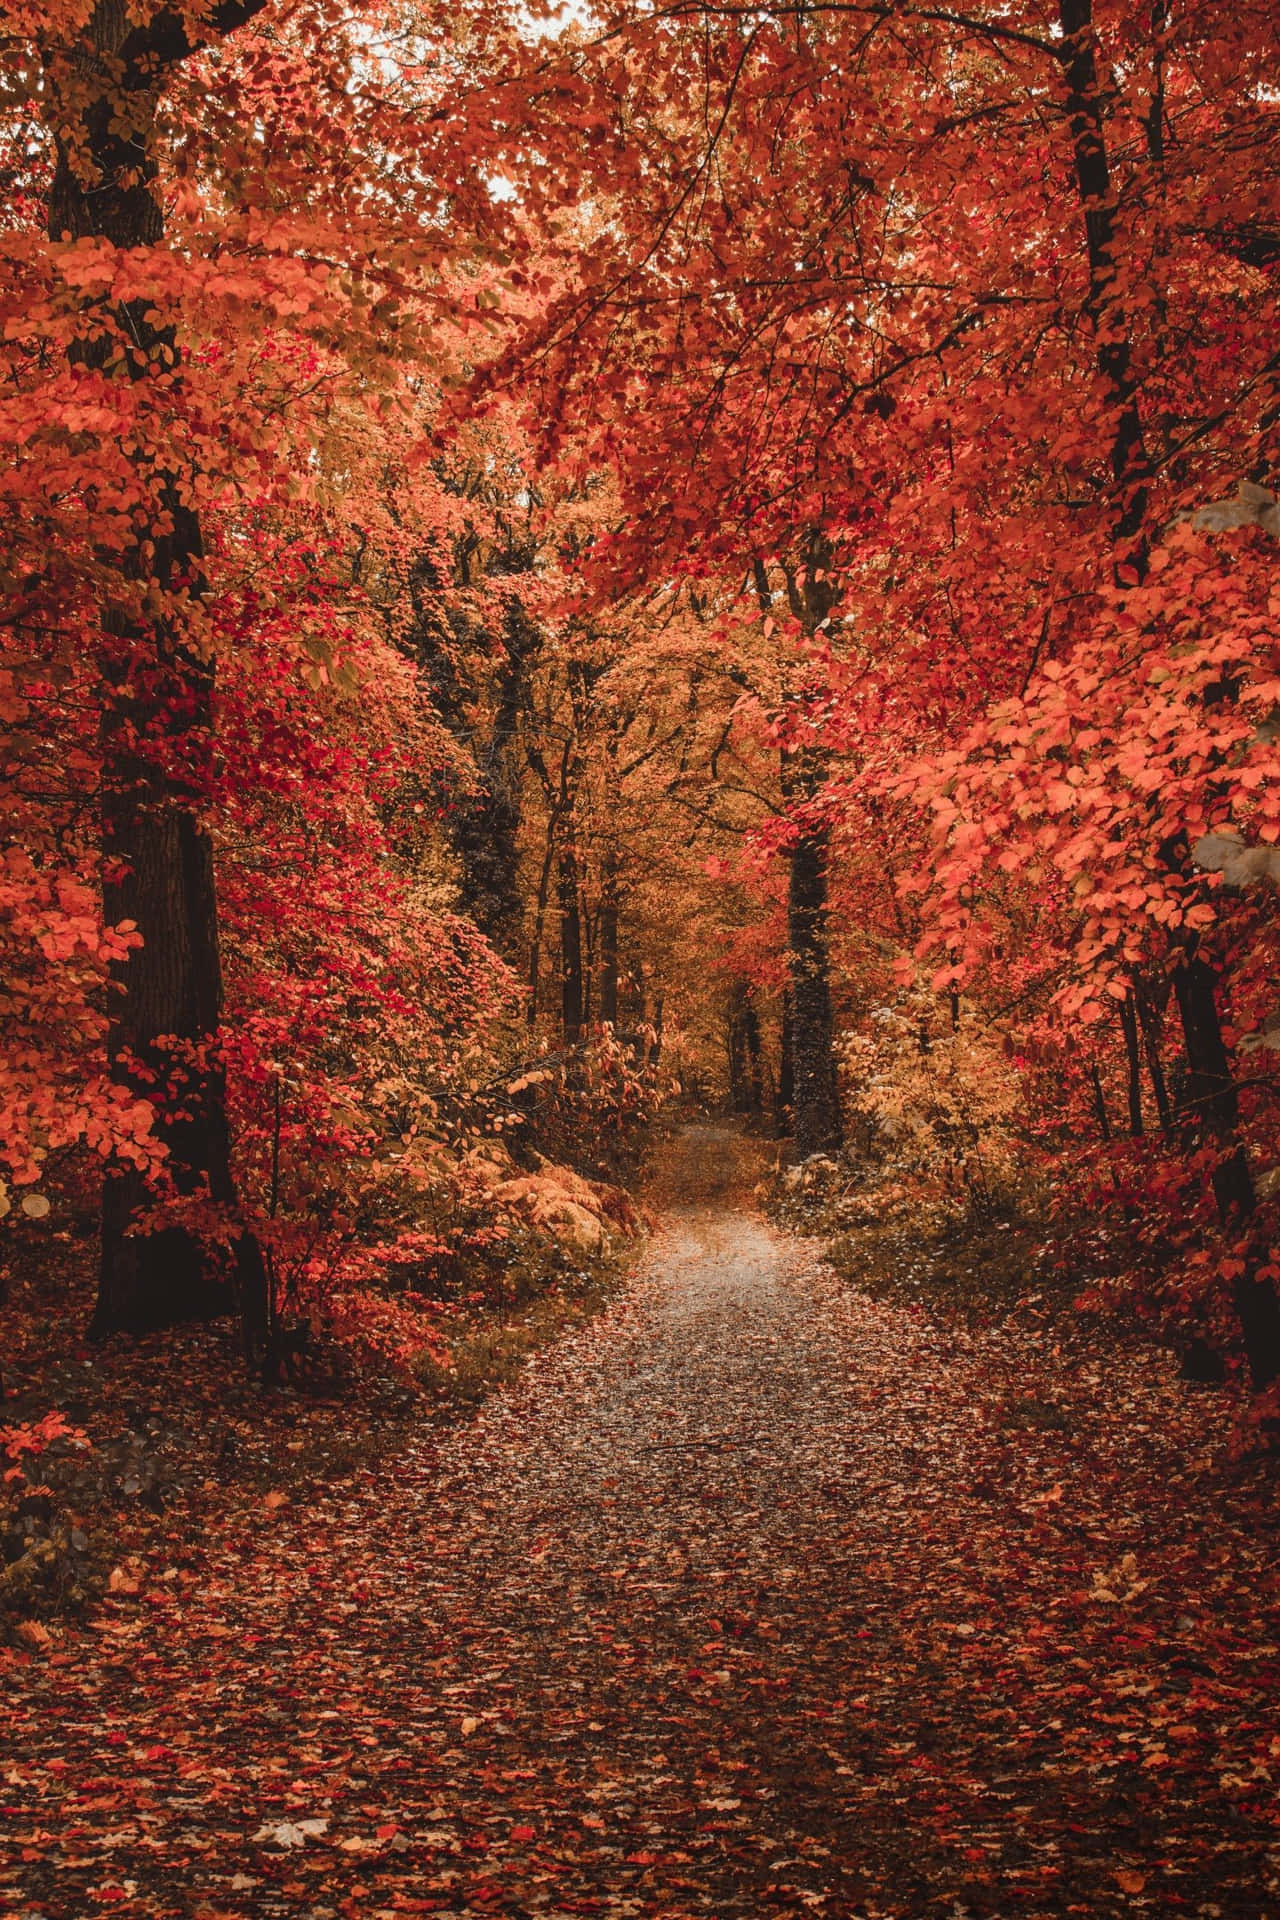 Autumn days in all their vibrant glory. Wallpaper